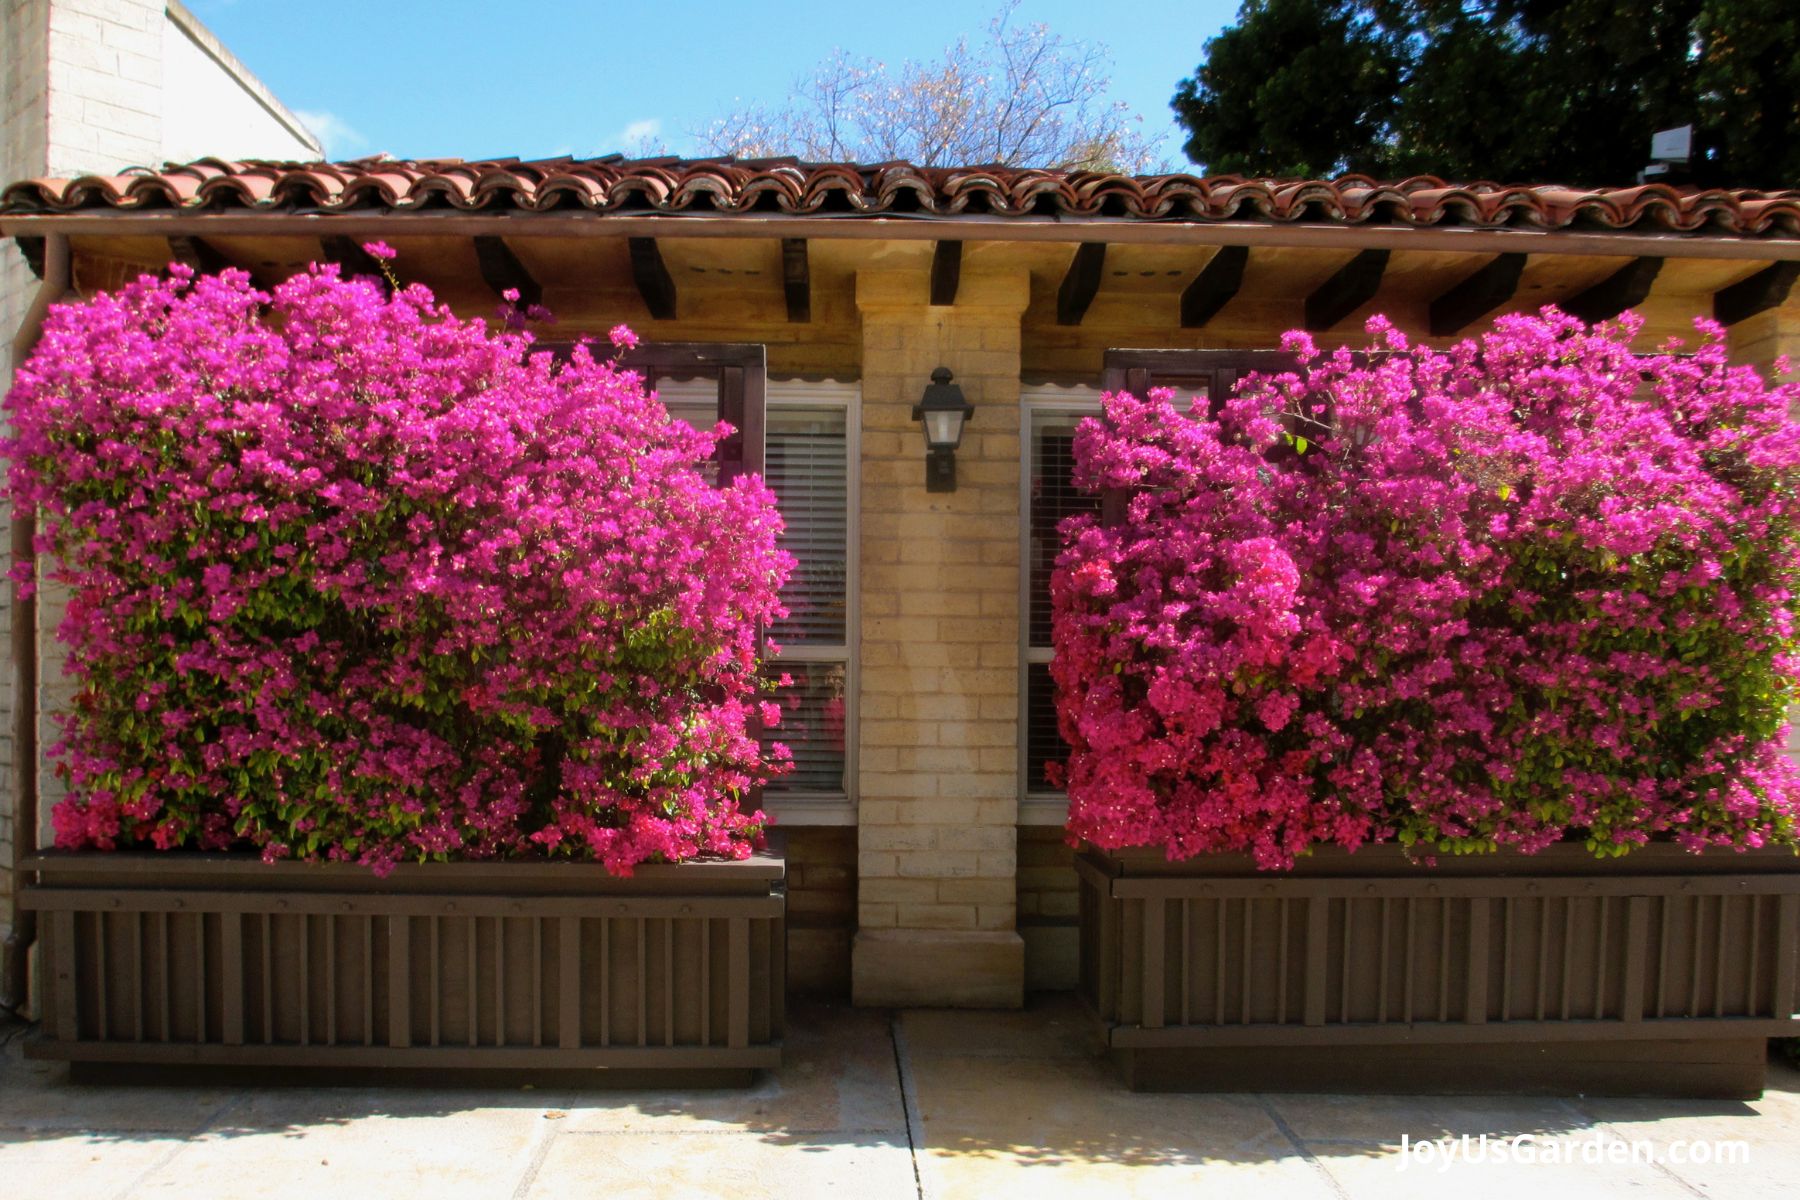 Two long patio planters with pink bougainvillea in full bloom. 